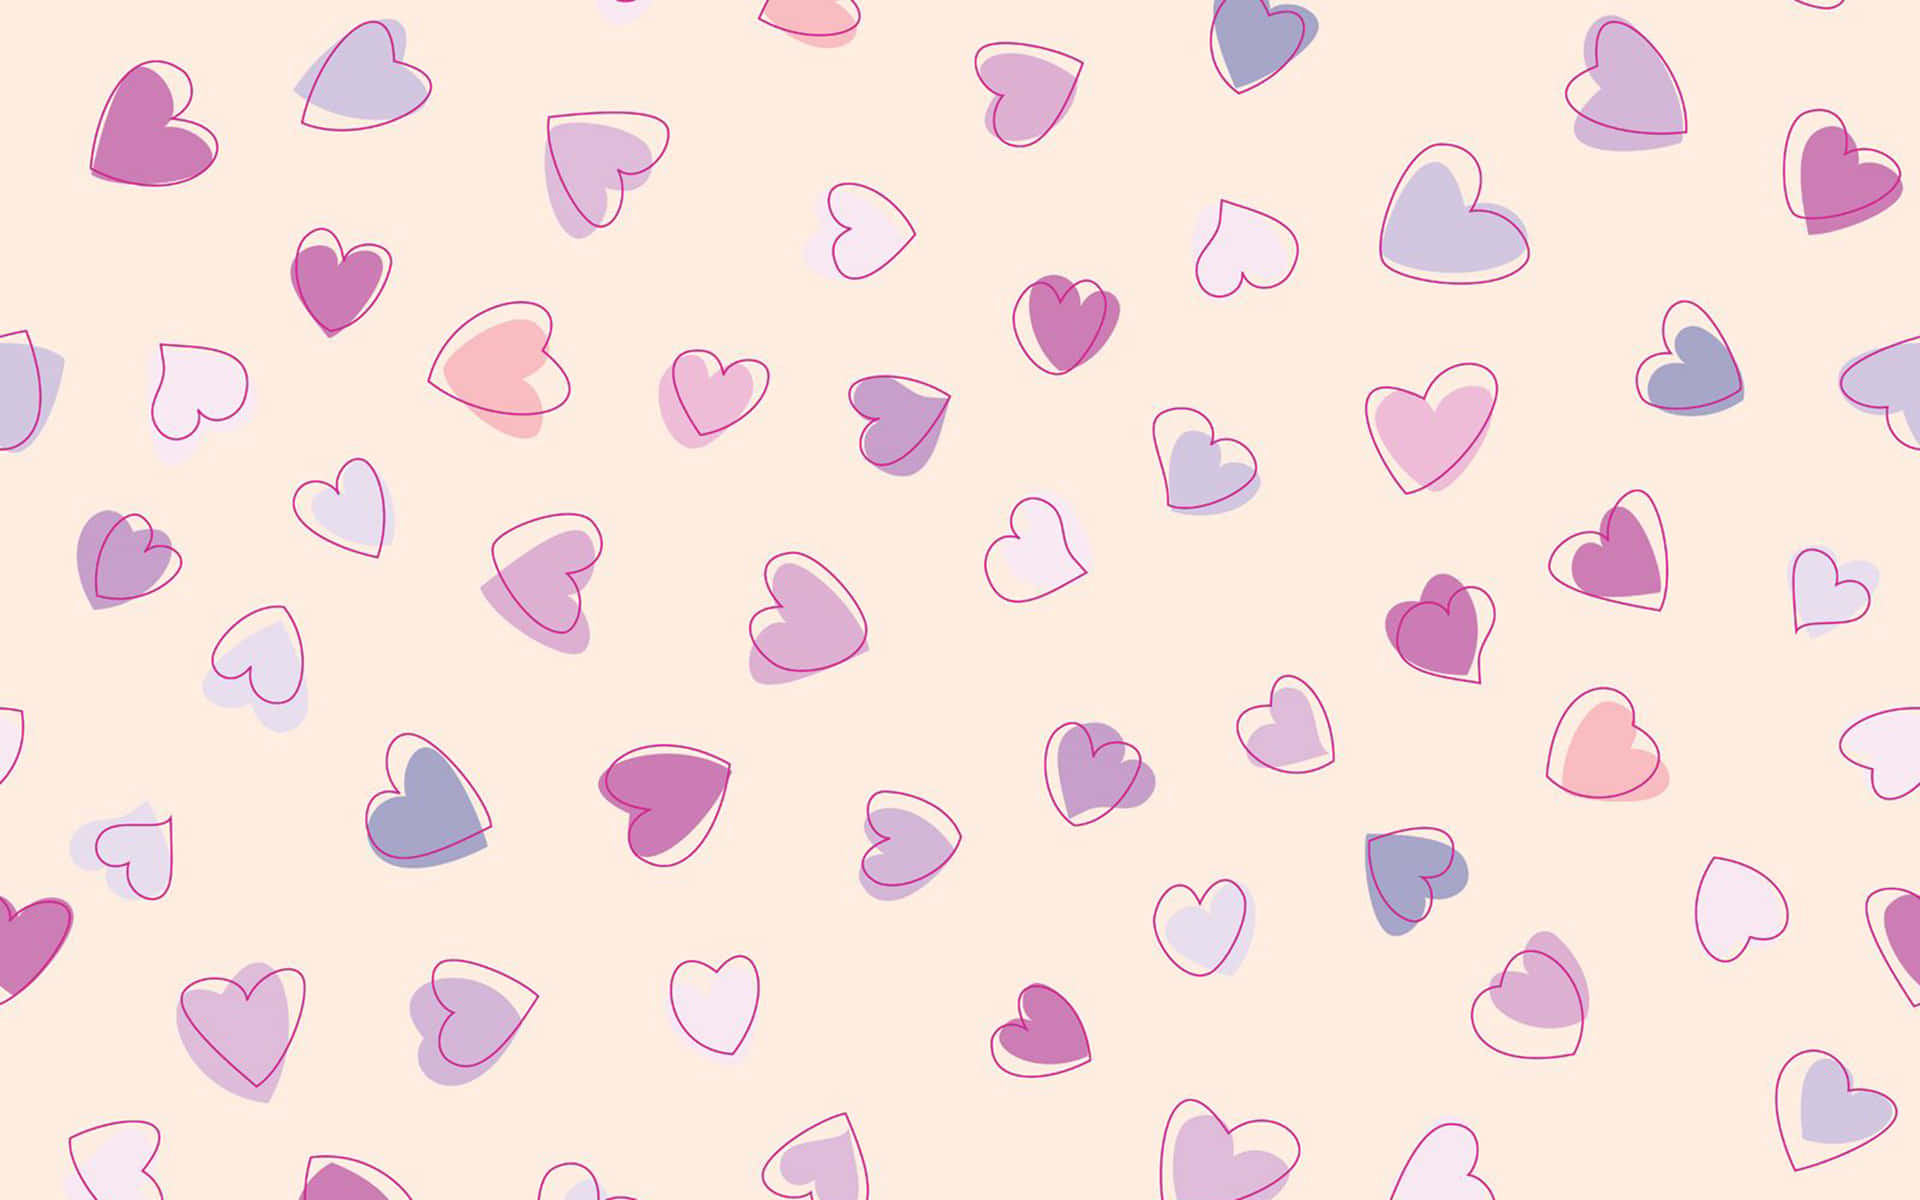 Love and Romance in the Air - Cute Hearts Wallpaper Wallpaper